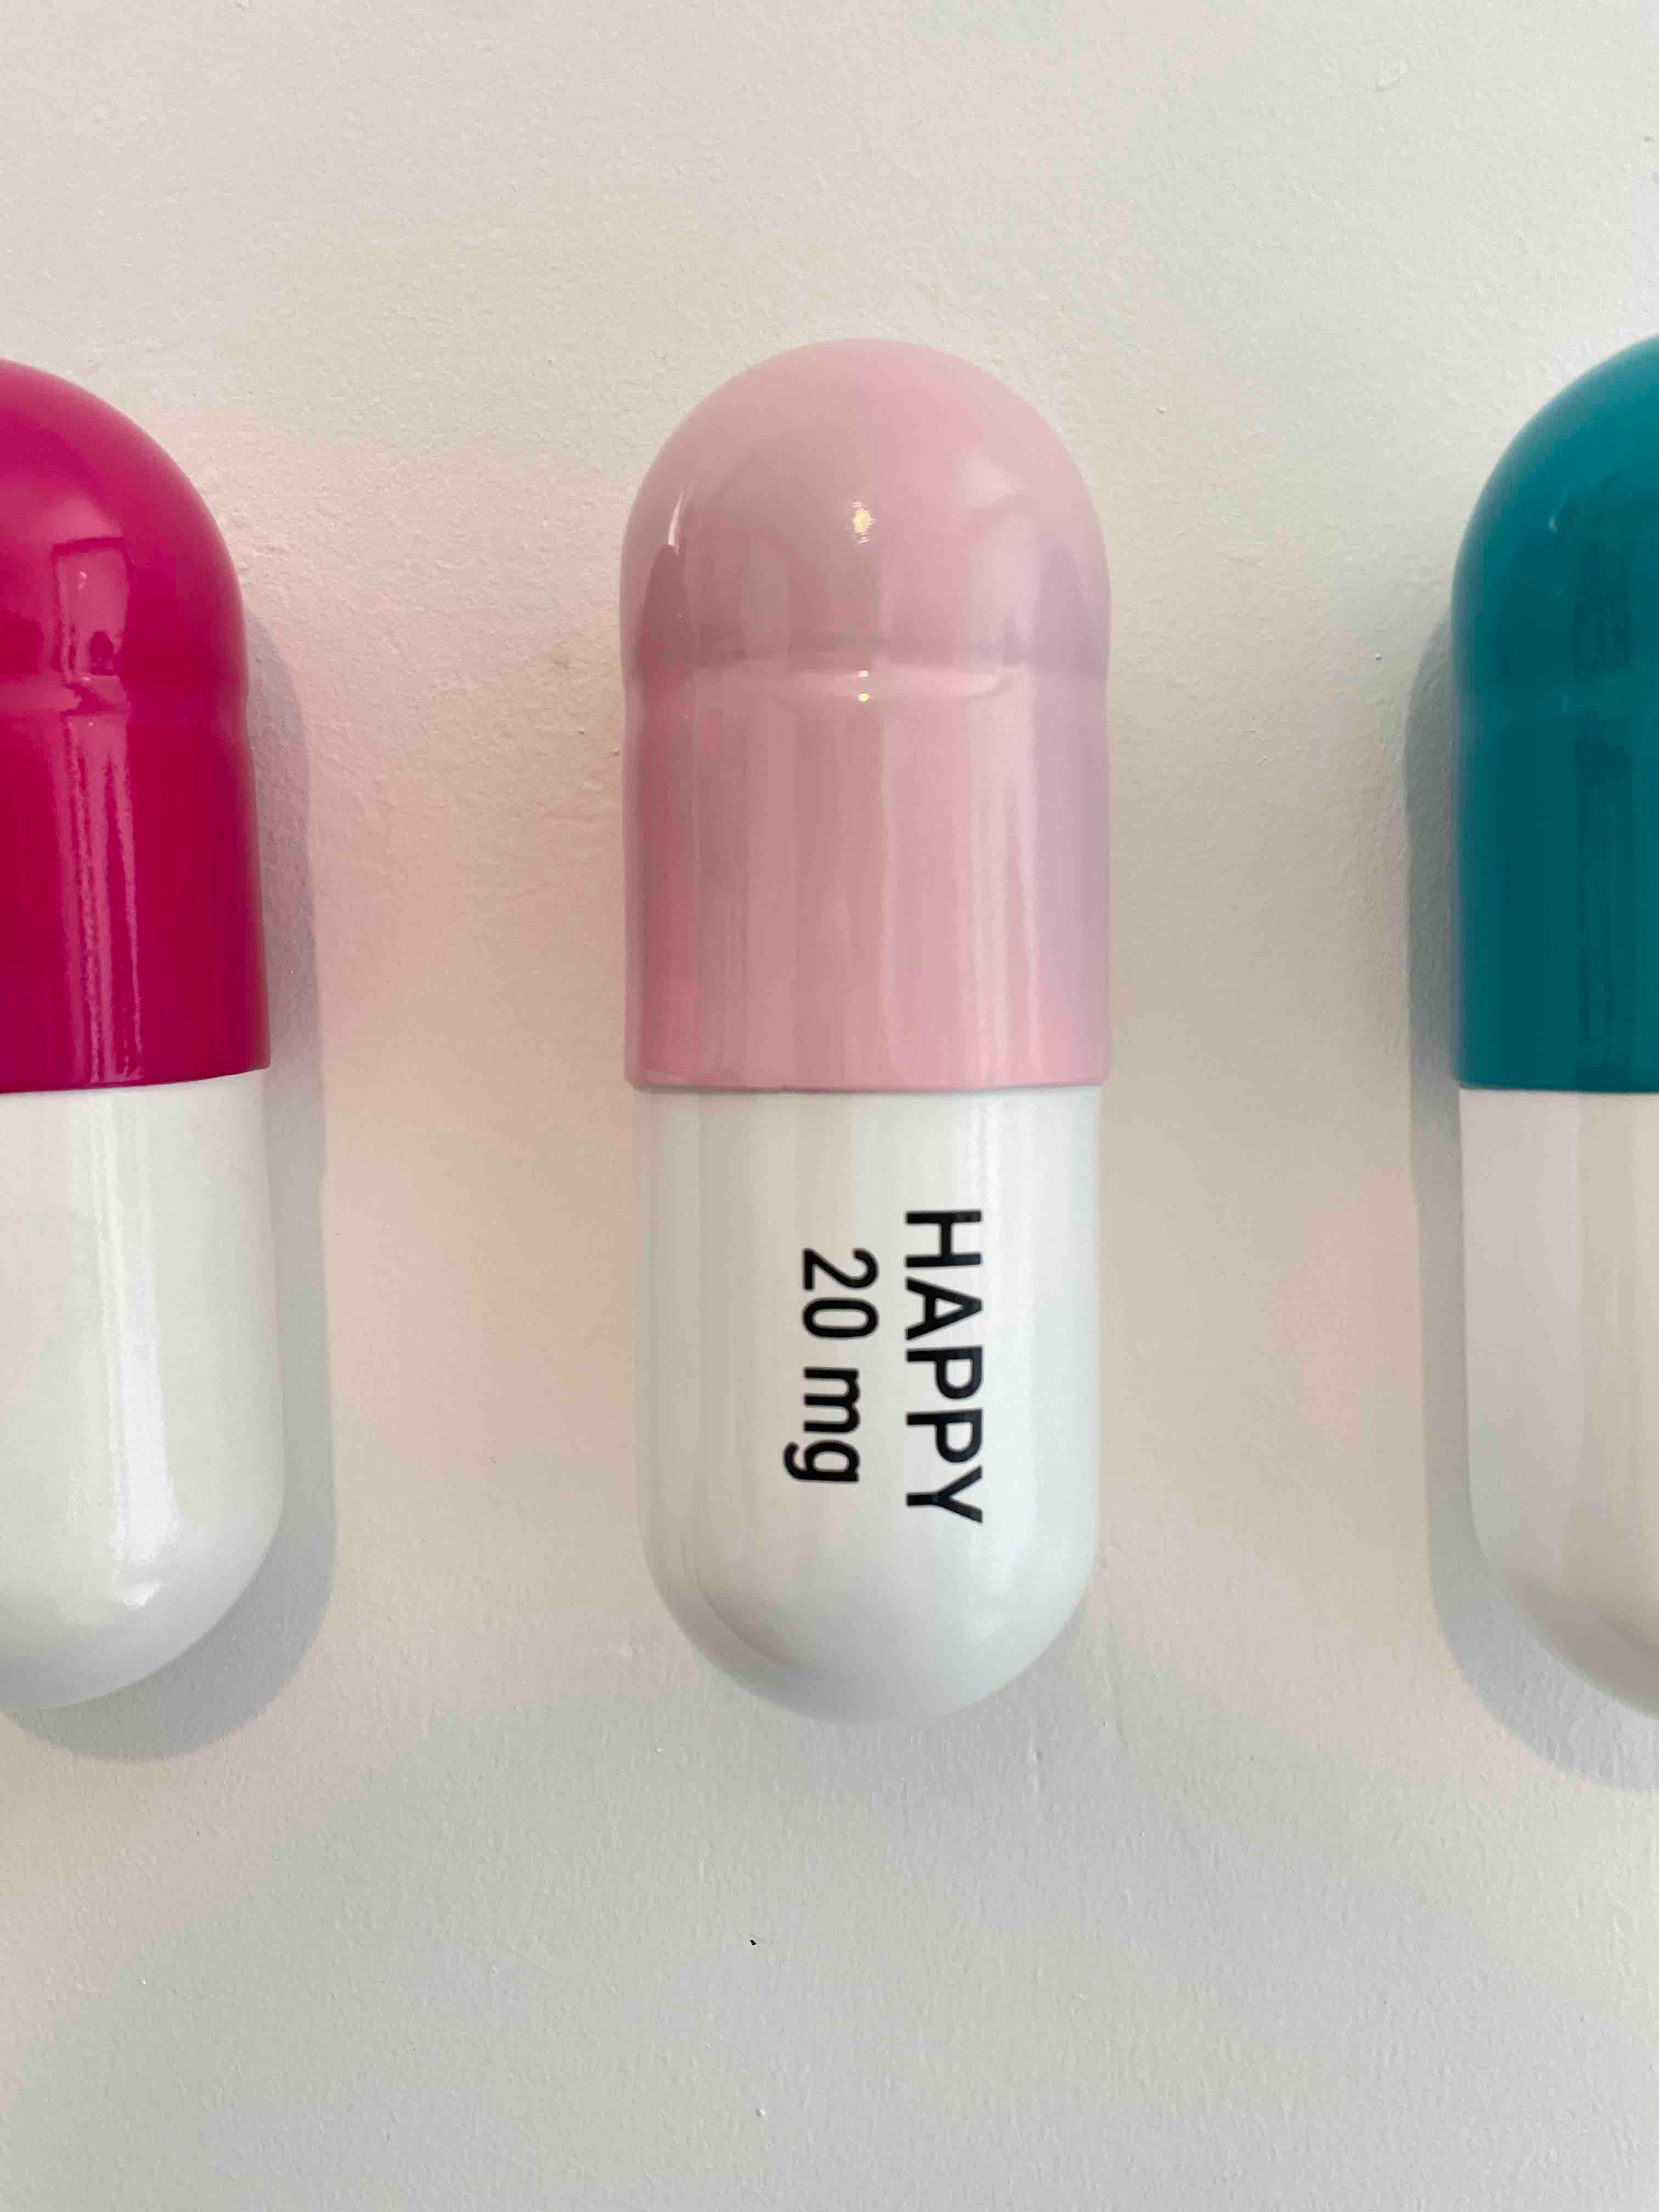 20 MG Happy pill Combo (turquoise, light pink and pink) - figurative sculpture - Gray Figurative Sculpture by Tal Nehoray